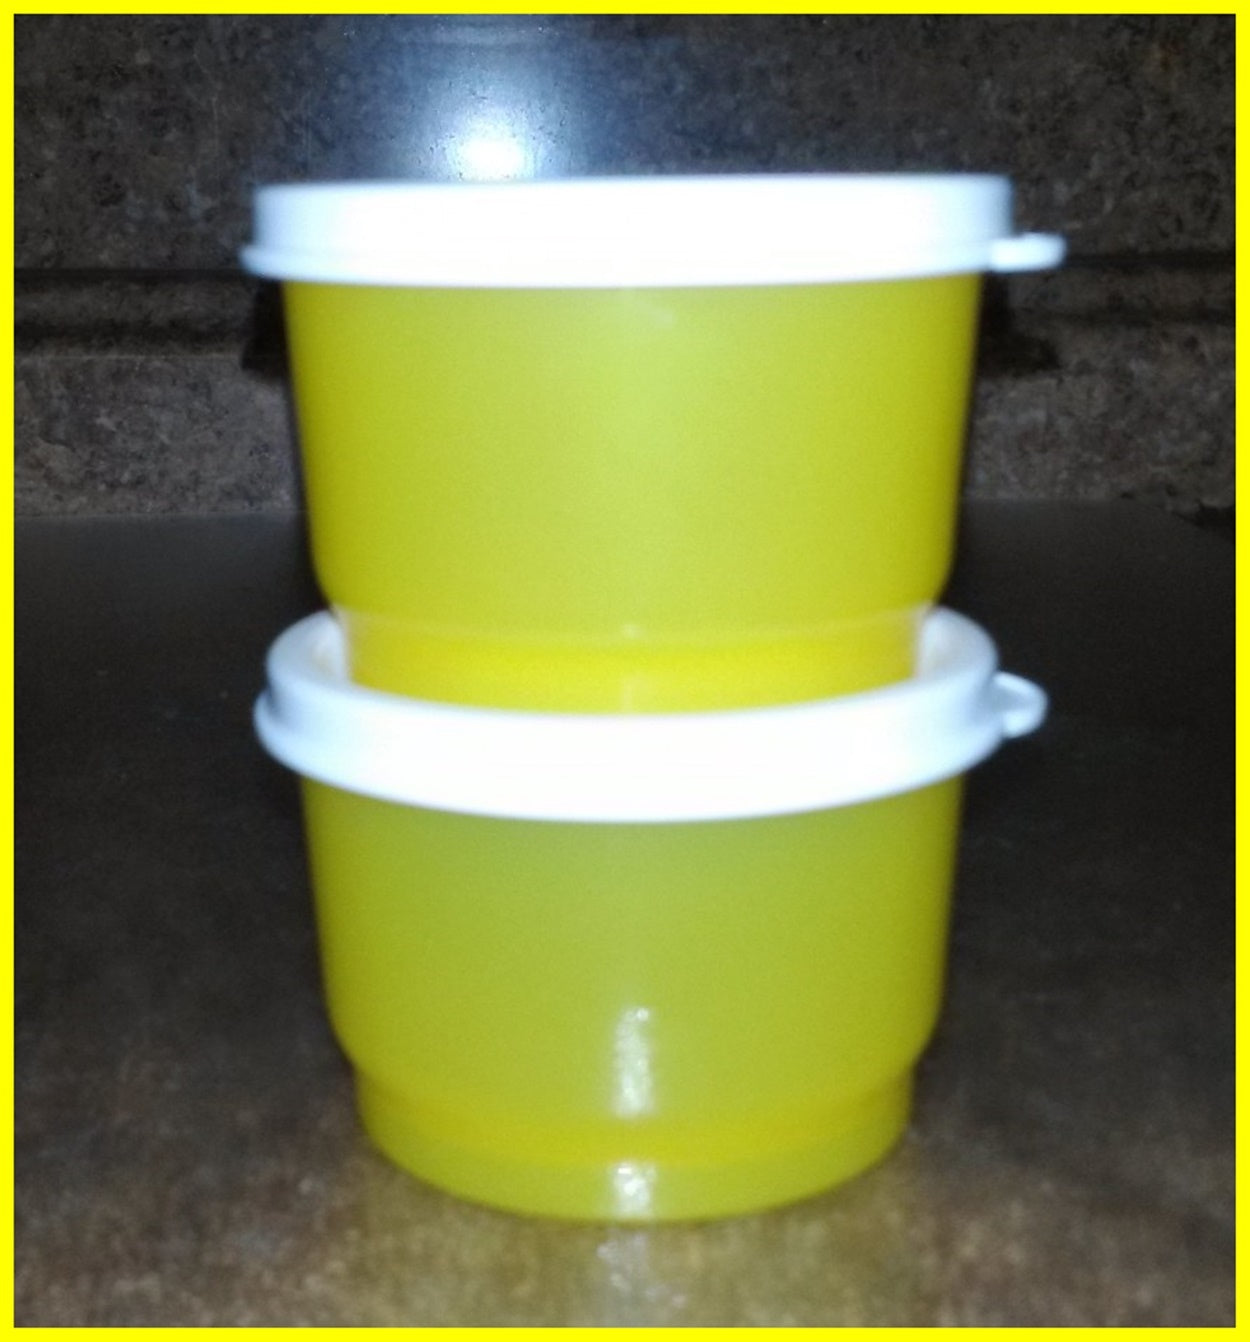 Vintage Tupperware Bowl / Replacement Bowl / Replacement Lid / yellow Tupperware  Bowl / Sheer Tupperware Bowl with Lid